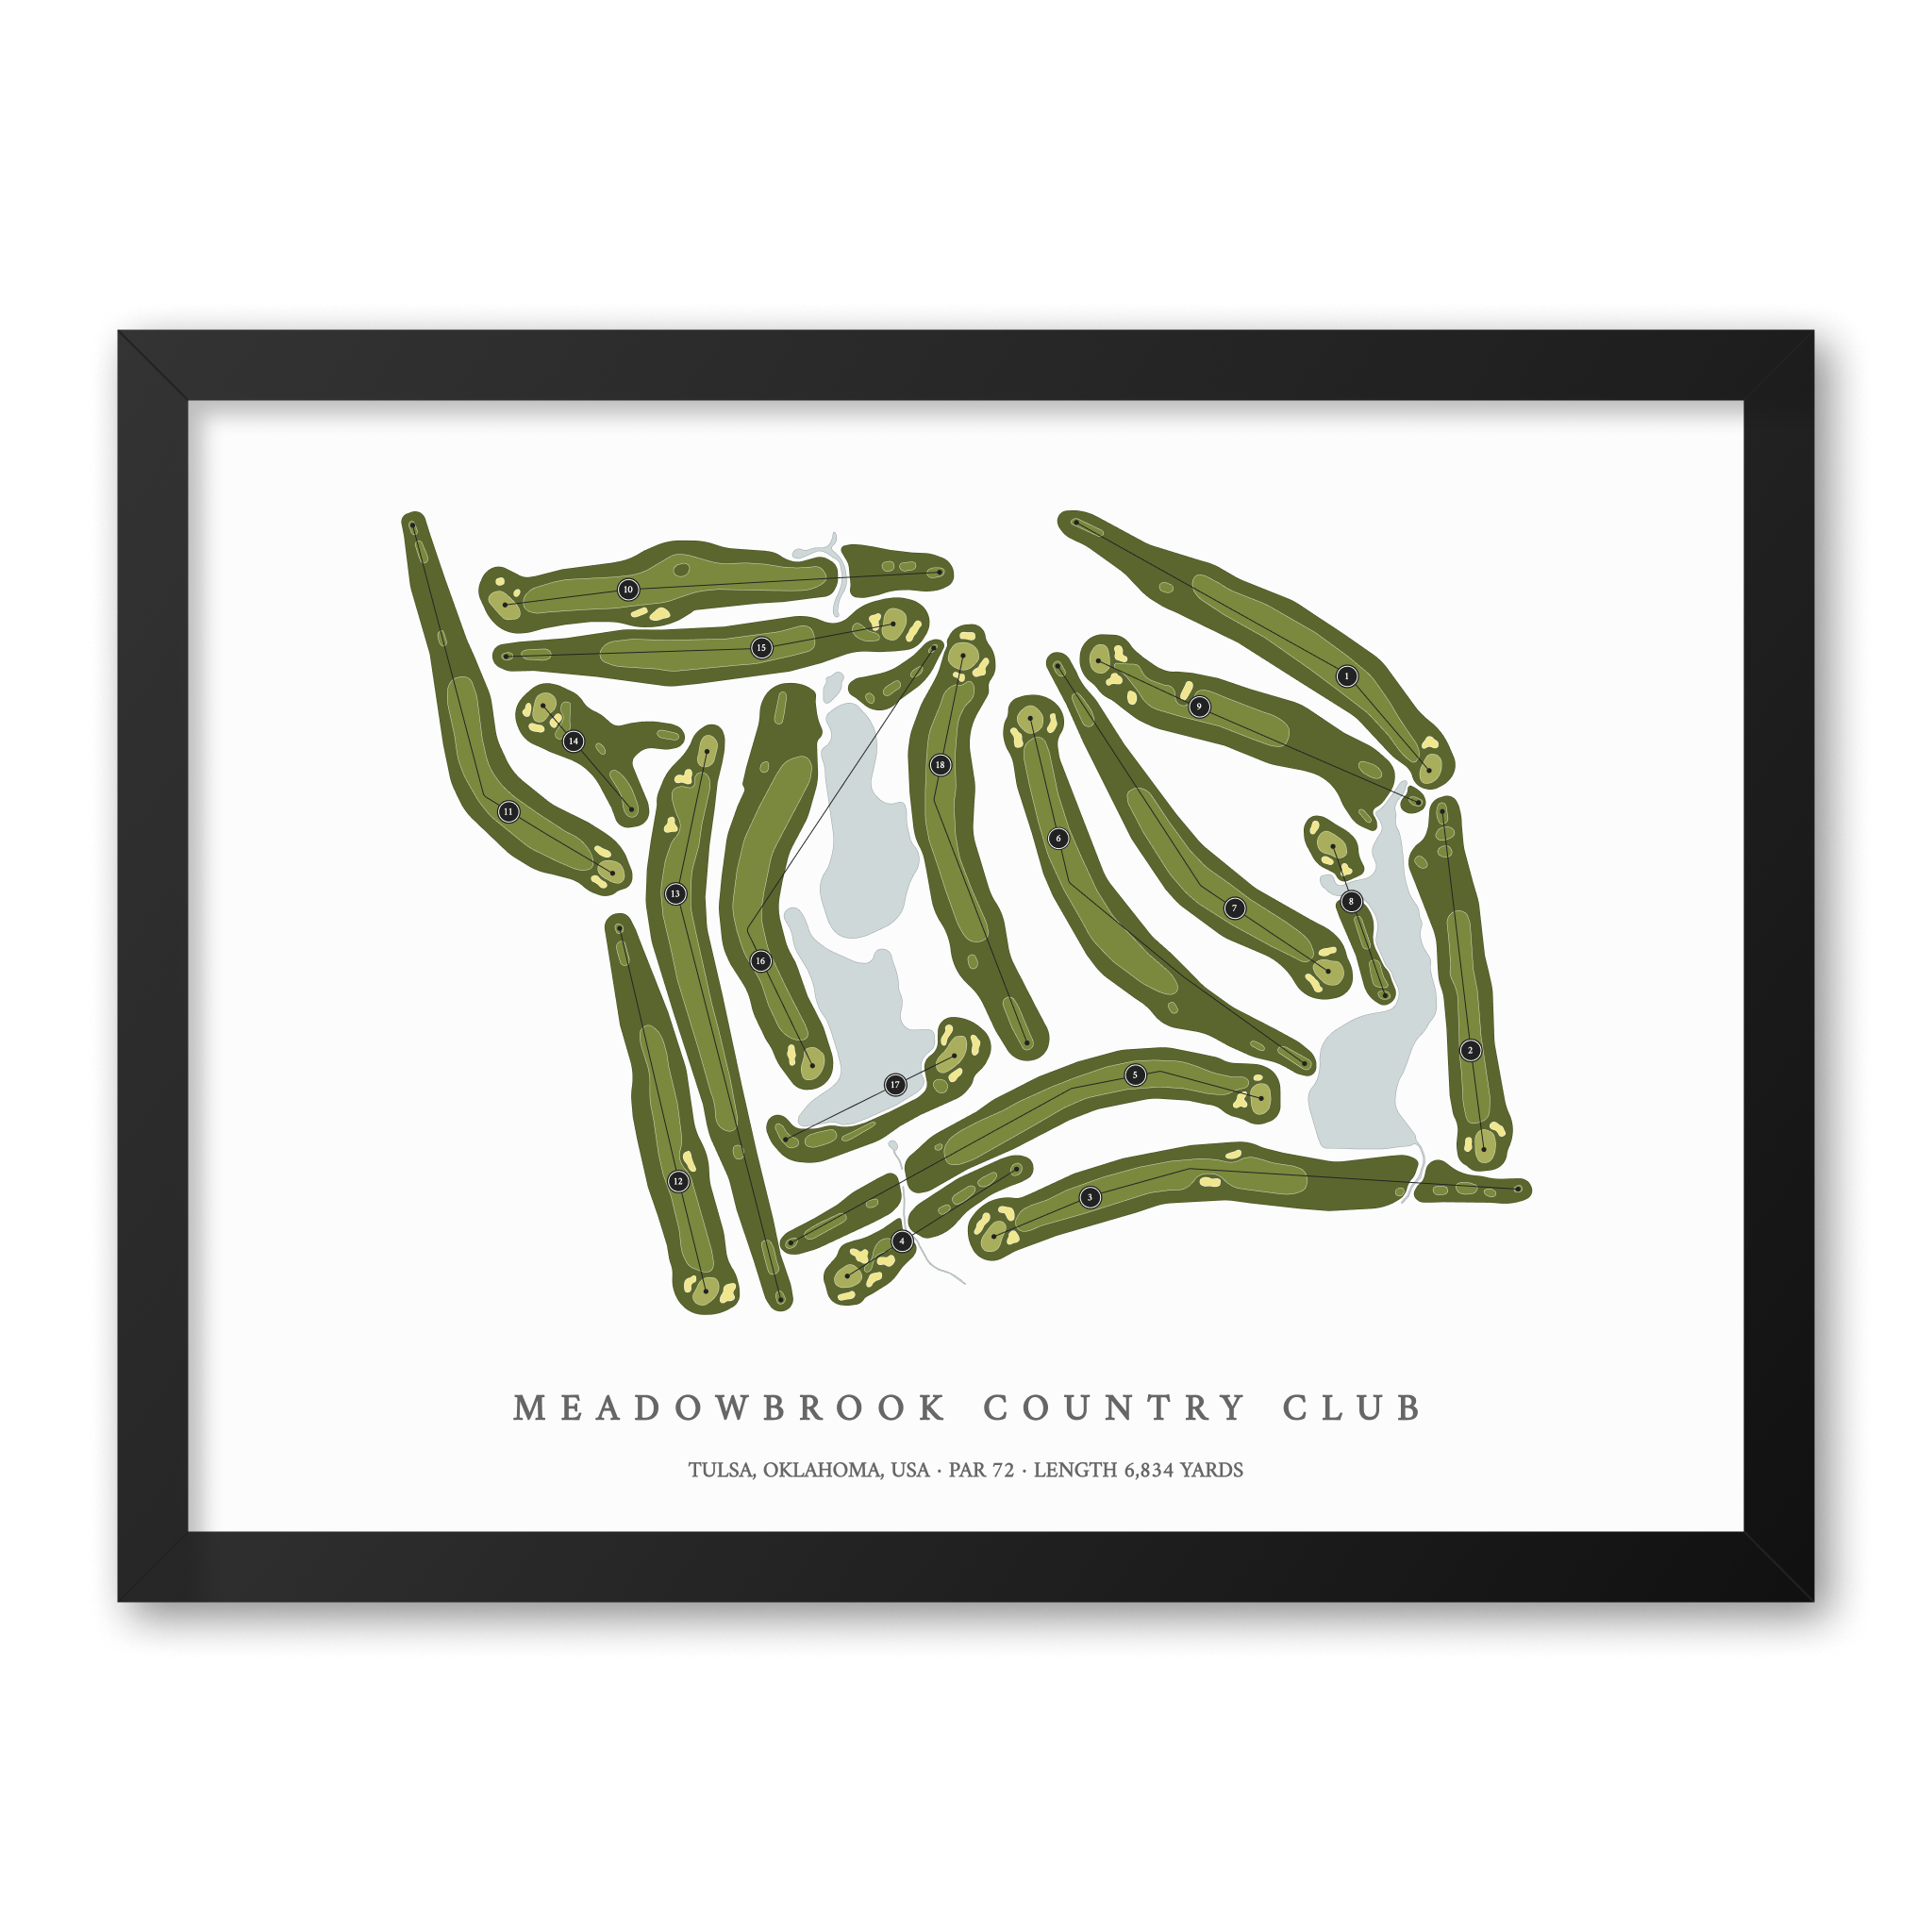 Meadowbrook Country Club | Golf Course Map | Black Frame With Hole Numbers #hole numbers_yes